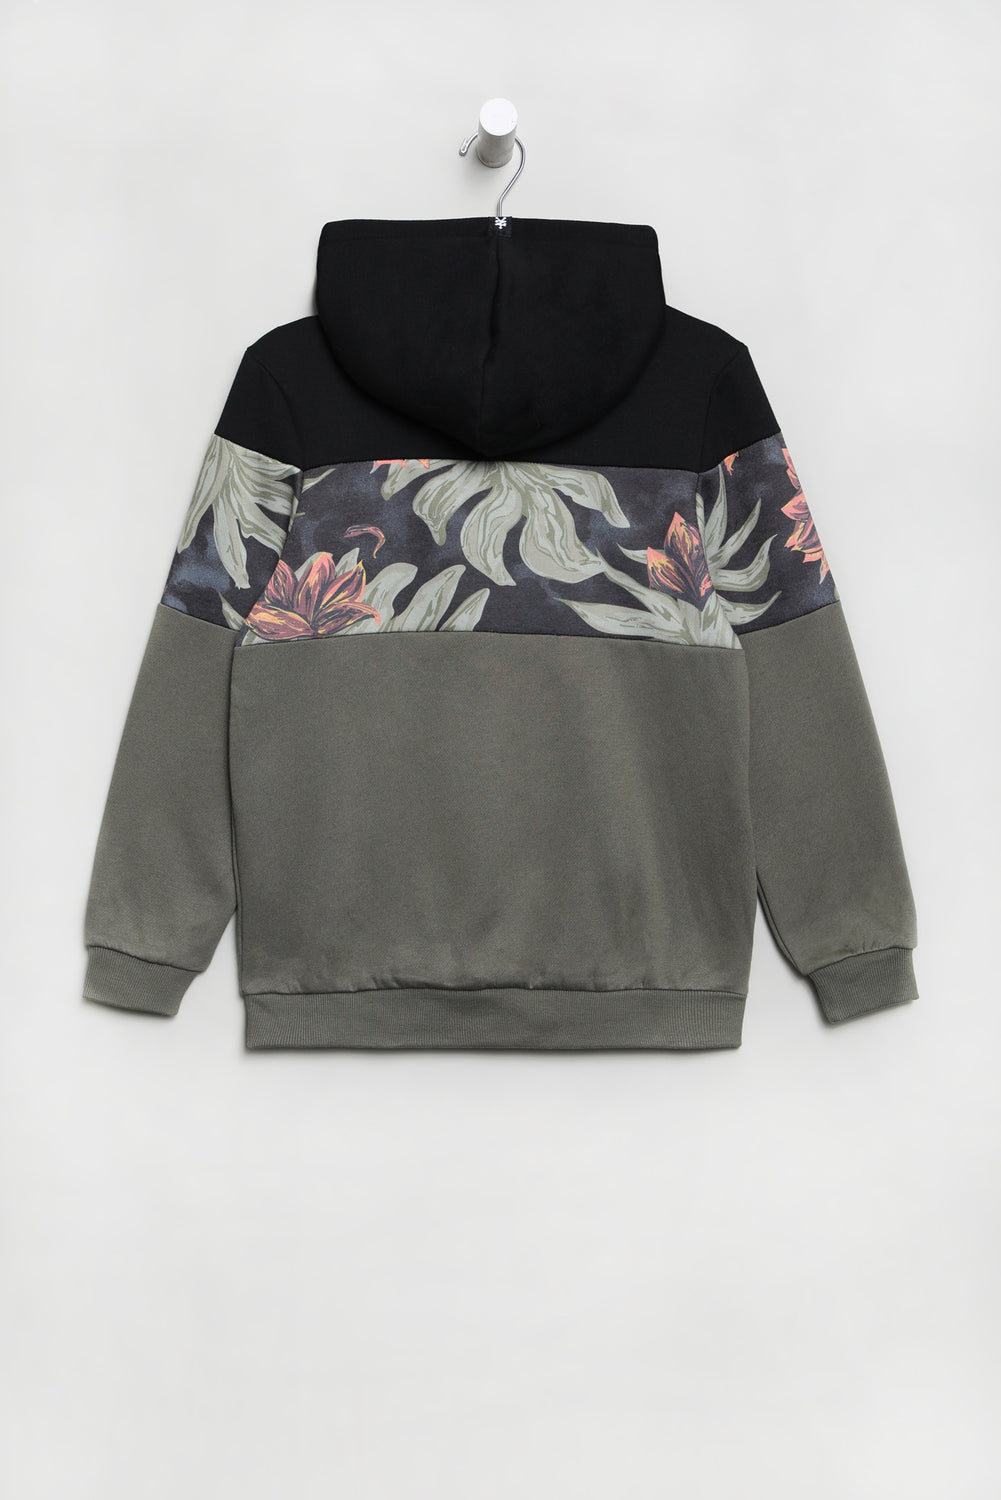 Zoo York Youth Tropical Colour Block Hoodie Zoo York Youth Tropical Colour Block Hoodie